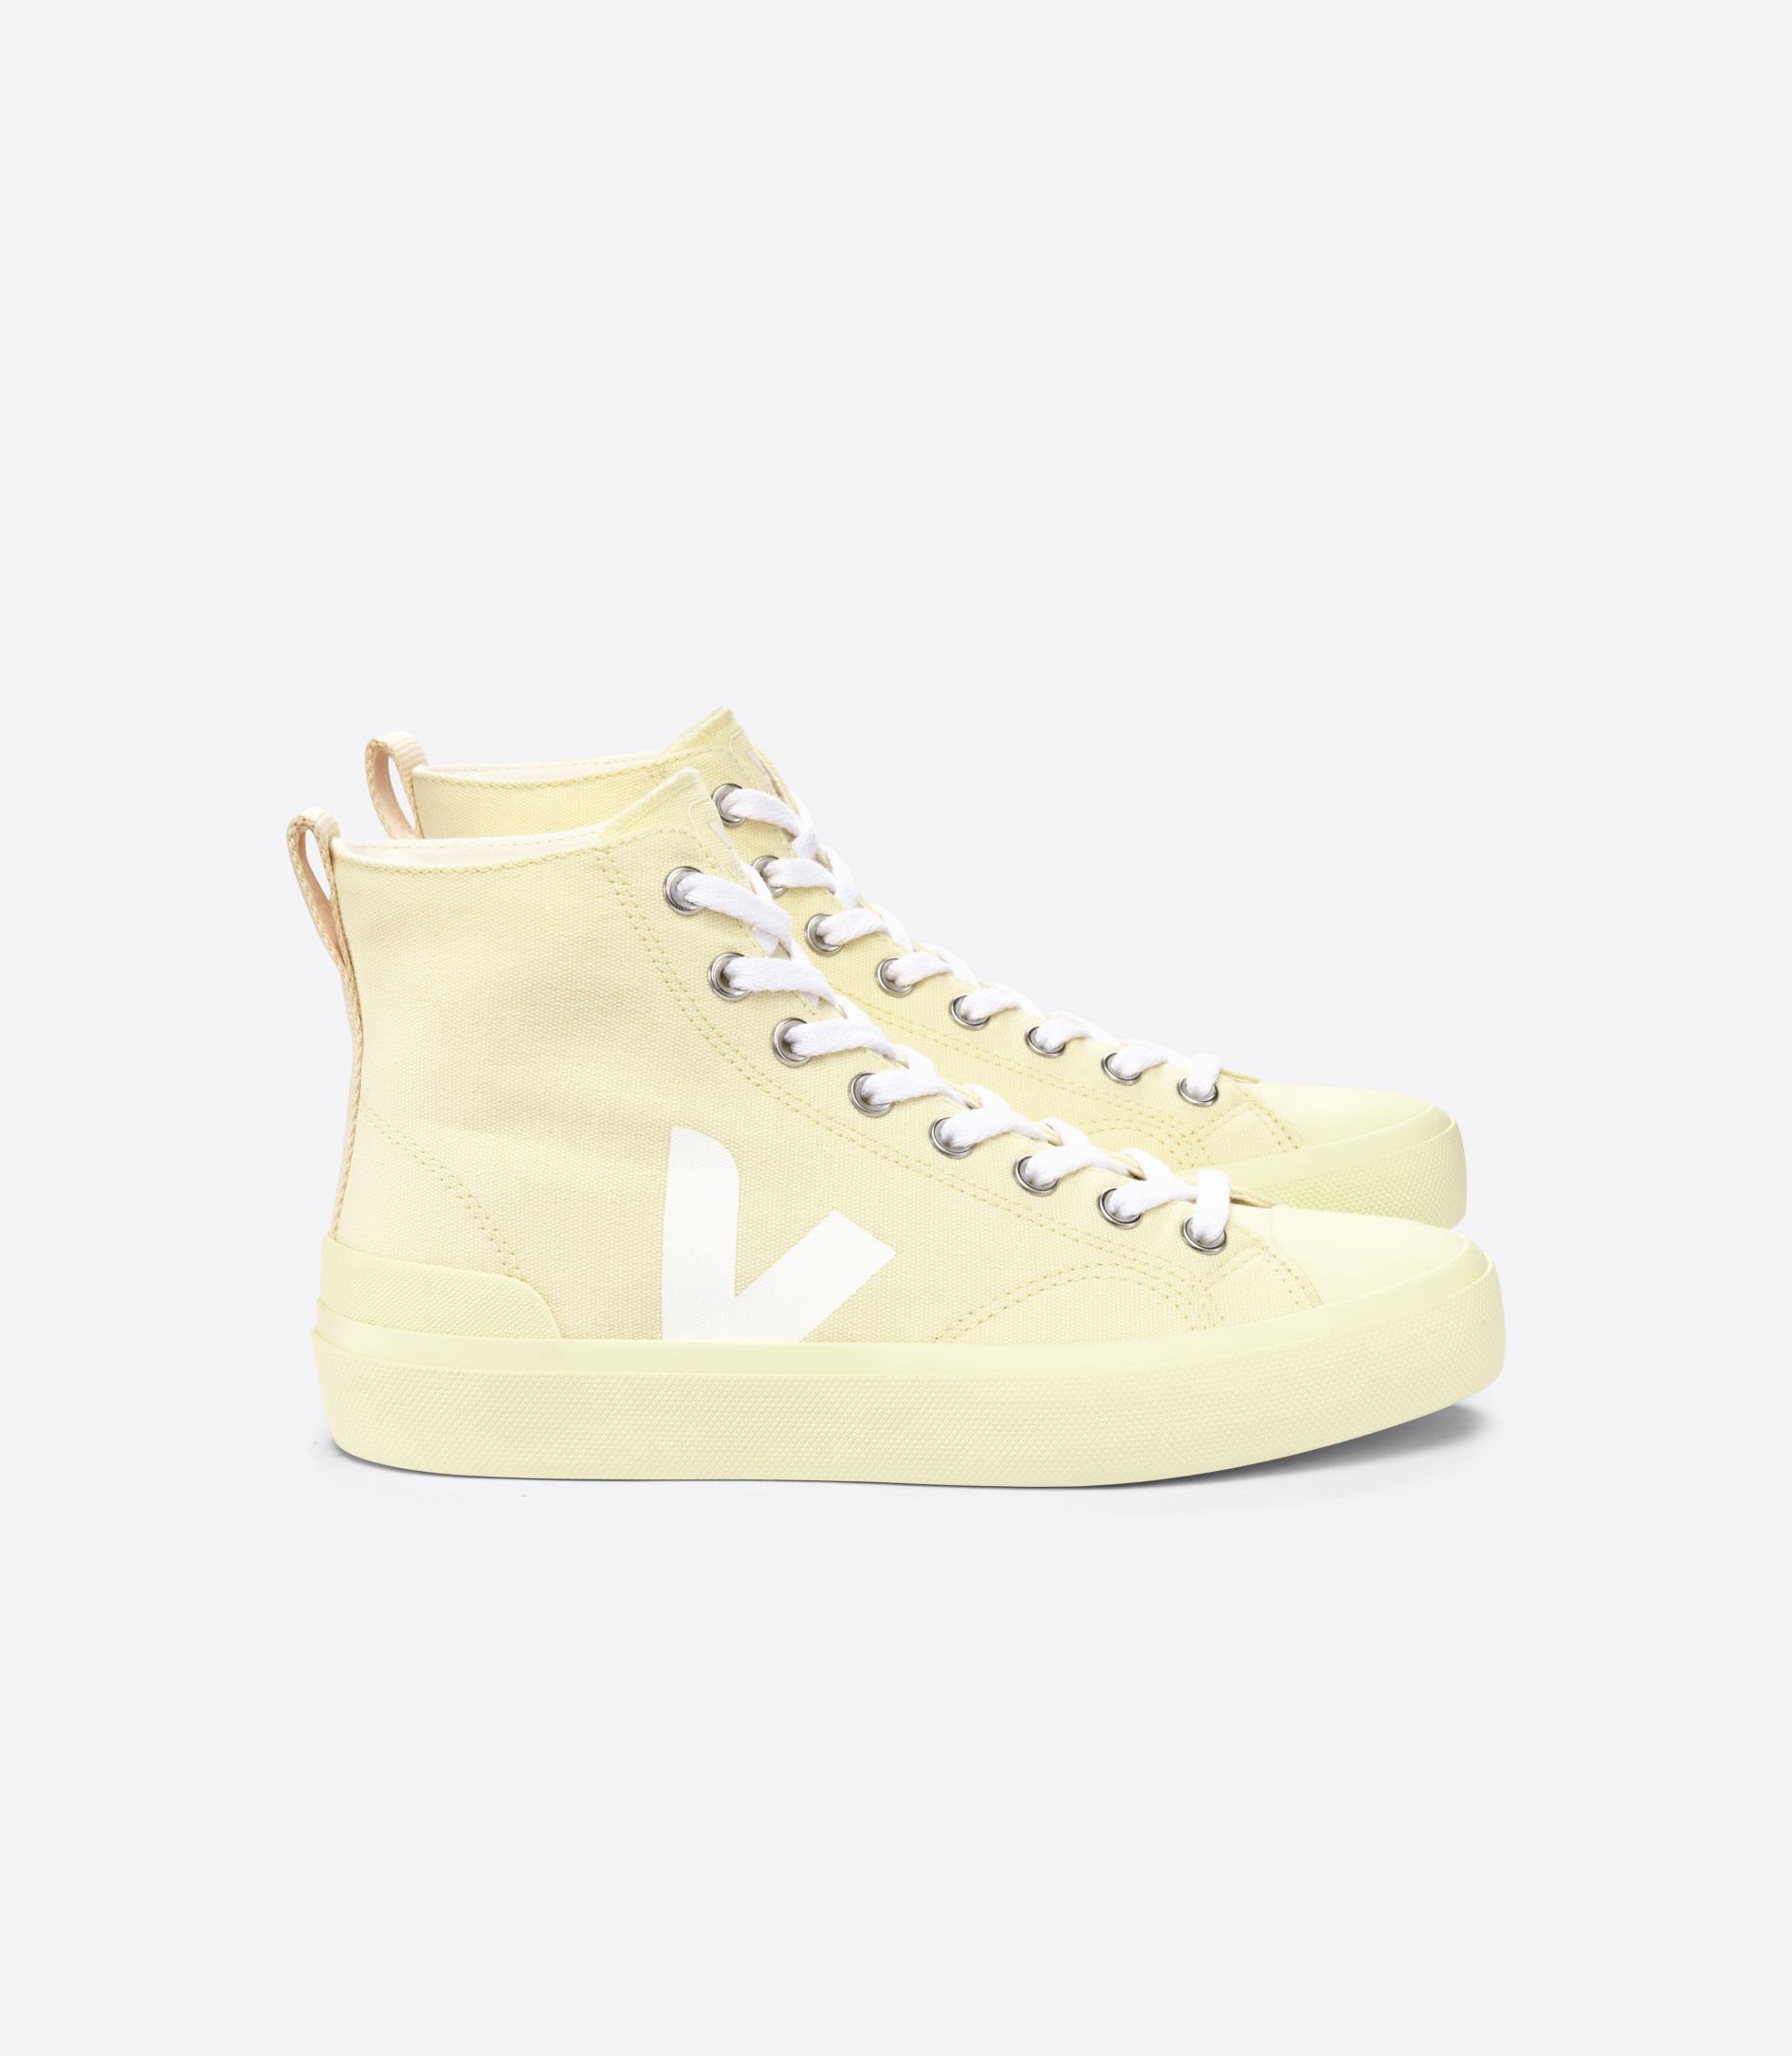 Veja Butter White WATA II Canvas Shoes with Butter Sole